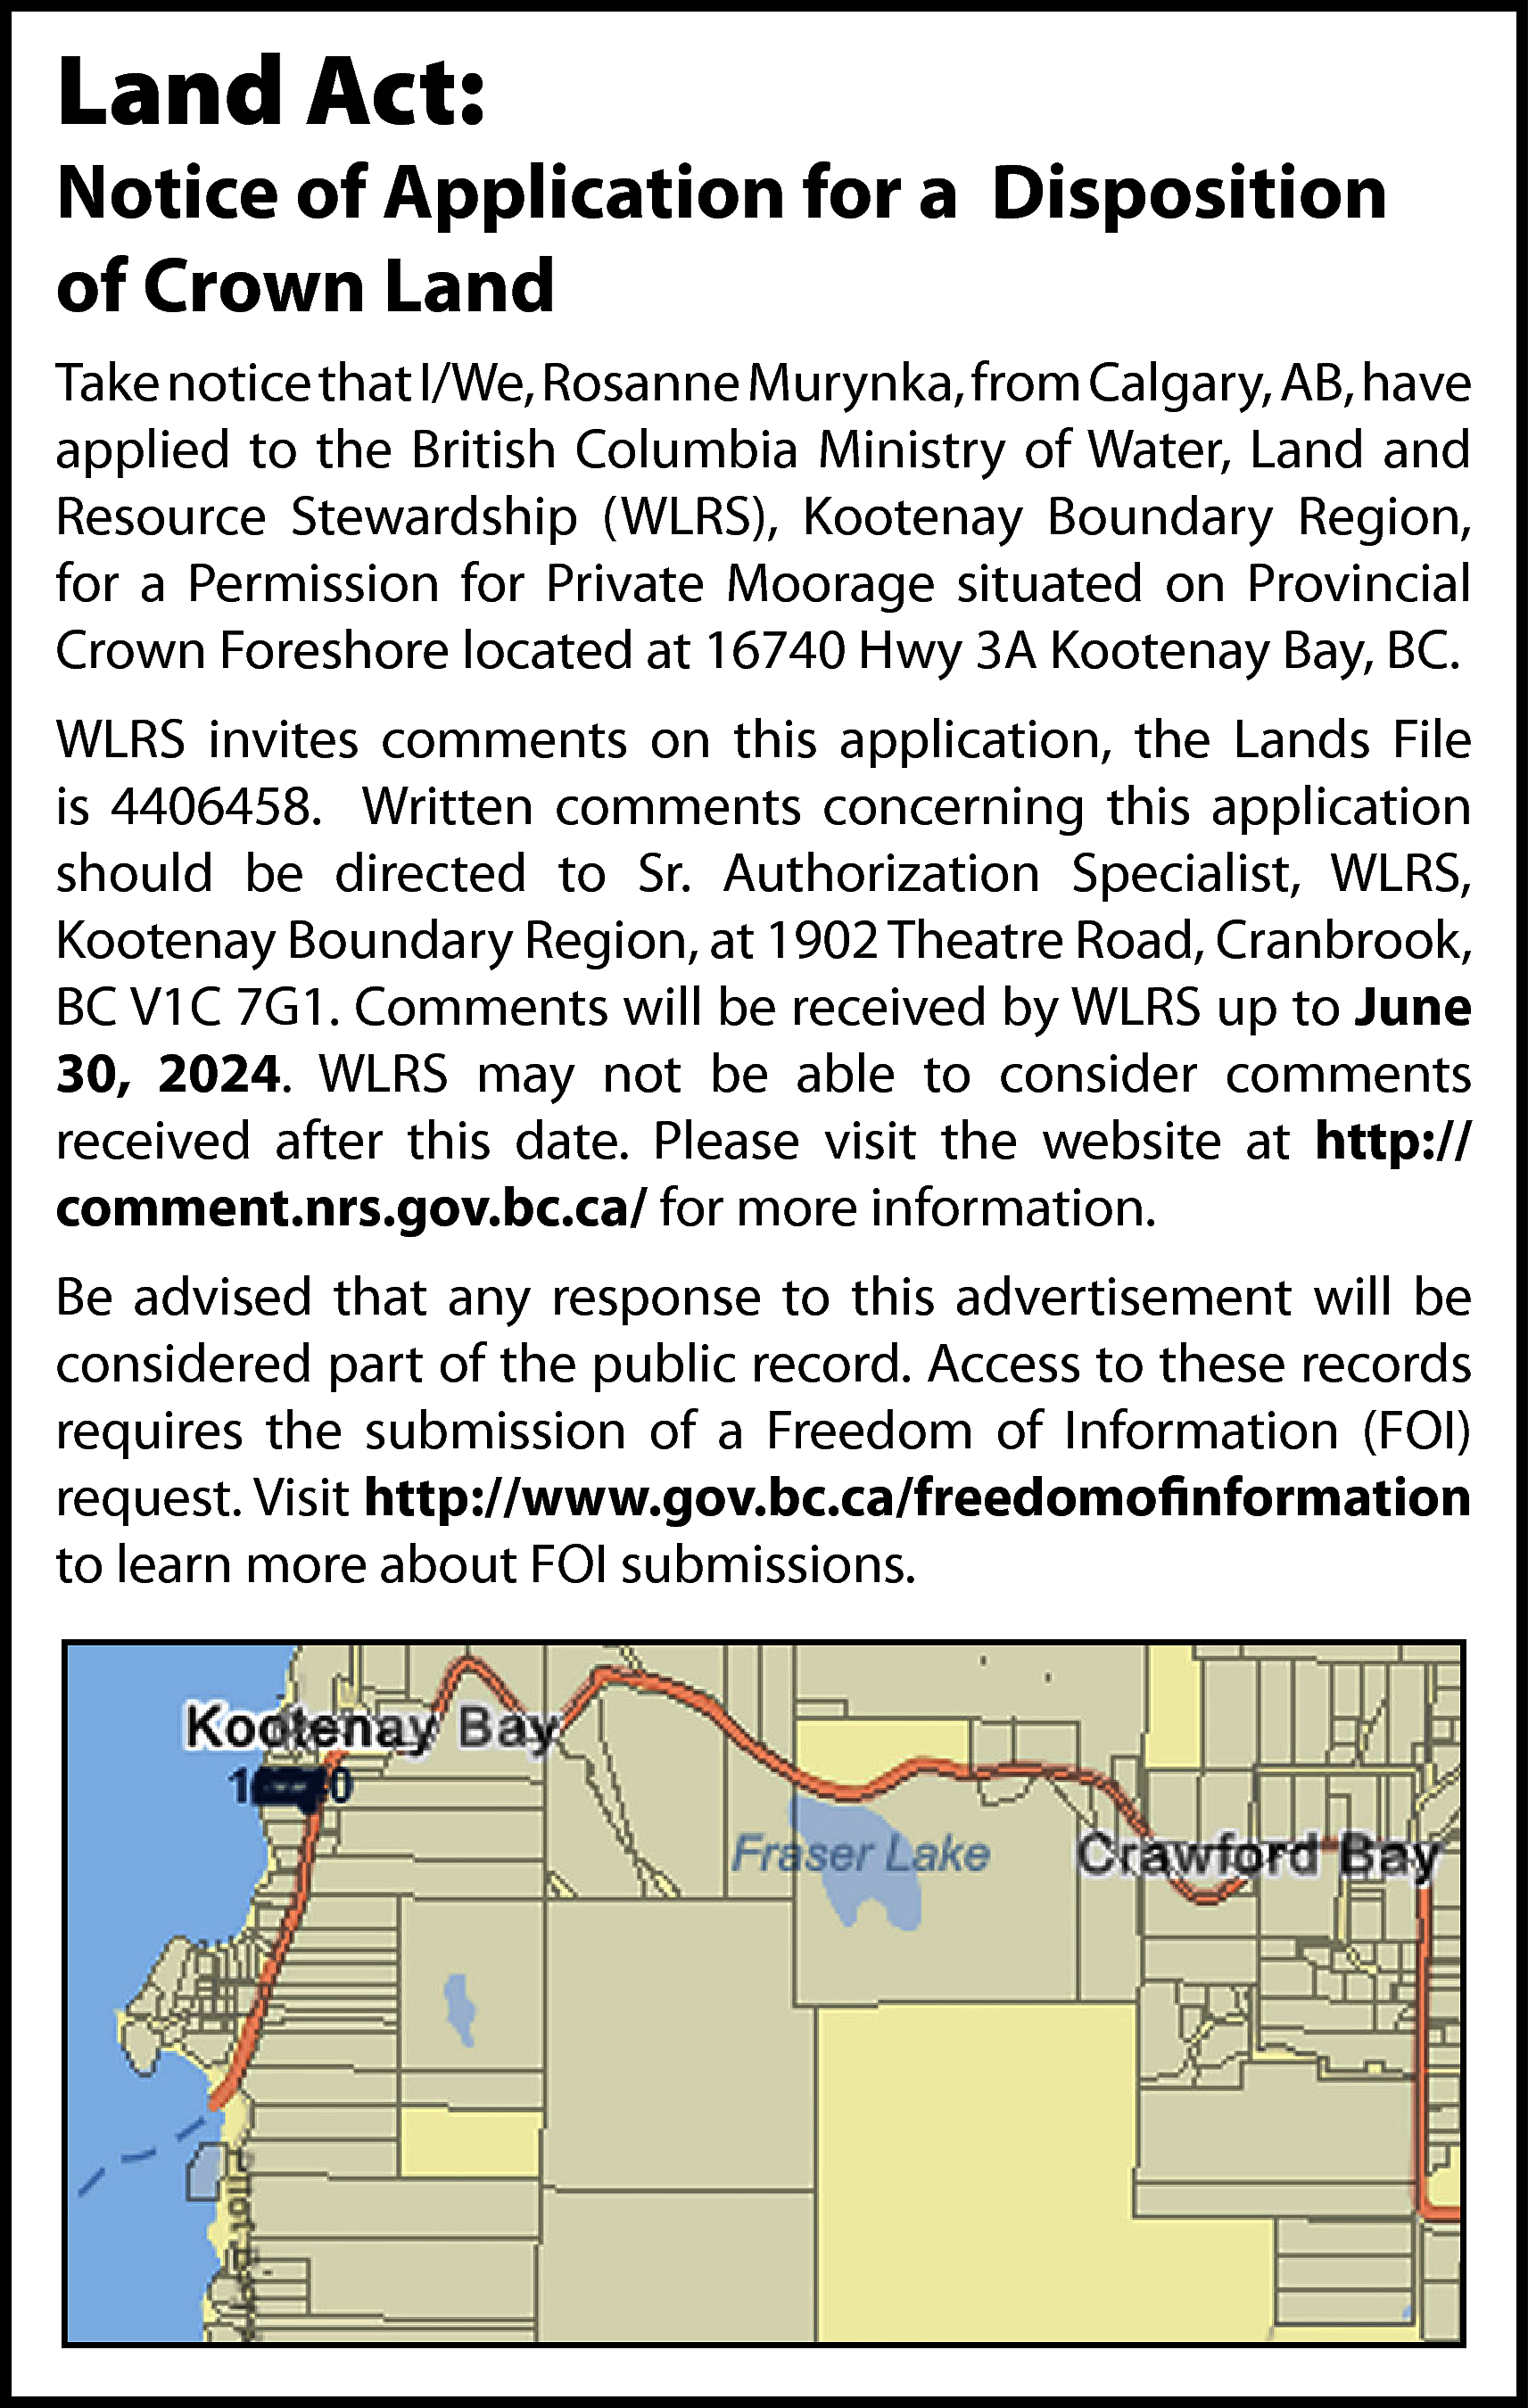 Land Act: <br> <br>Notice of  Land Act:    Notice of Application for a Disposition  of Crown Land  Take notice that I/We, Rosanne Murynka, from Calgary, AB, have  applied to the British Columbia Ministry of Water, Land and  Resource Stewardship (WLRS), Kootenay Boundary Region,  for a Permission for Private Moorage situated on Provincial  Crown Foreshore located at 16740 Hwy 3A Kootenay Bay, BC.  WLRS invites comments on this application, the Lands File  is 4406458. Written comments concerning this application  should be directed to Sr. Authorization Specialist, WLRS,  Kootenay Boundary Region, at 1902 Theatre Road, Cranbrook,  BC V1C 7G1. Comments will be received by WLRS up to June  30, 2024. WLRS may not be able to consider comments  received after this date. Please visit the website at http://  comment.nrs.gov.bc.ca/ for more information.  Be advised that any response to this advertisement will be  considered part of the public record. Access to these records  requires the submission of a Freedom of Information (FOI)  request. Visit http://www.gov.bc.ca/freedomofinformation  to learn more about FOI submissions.    